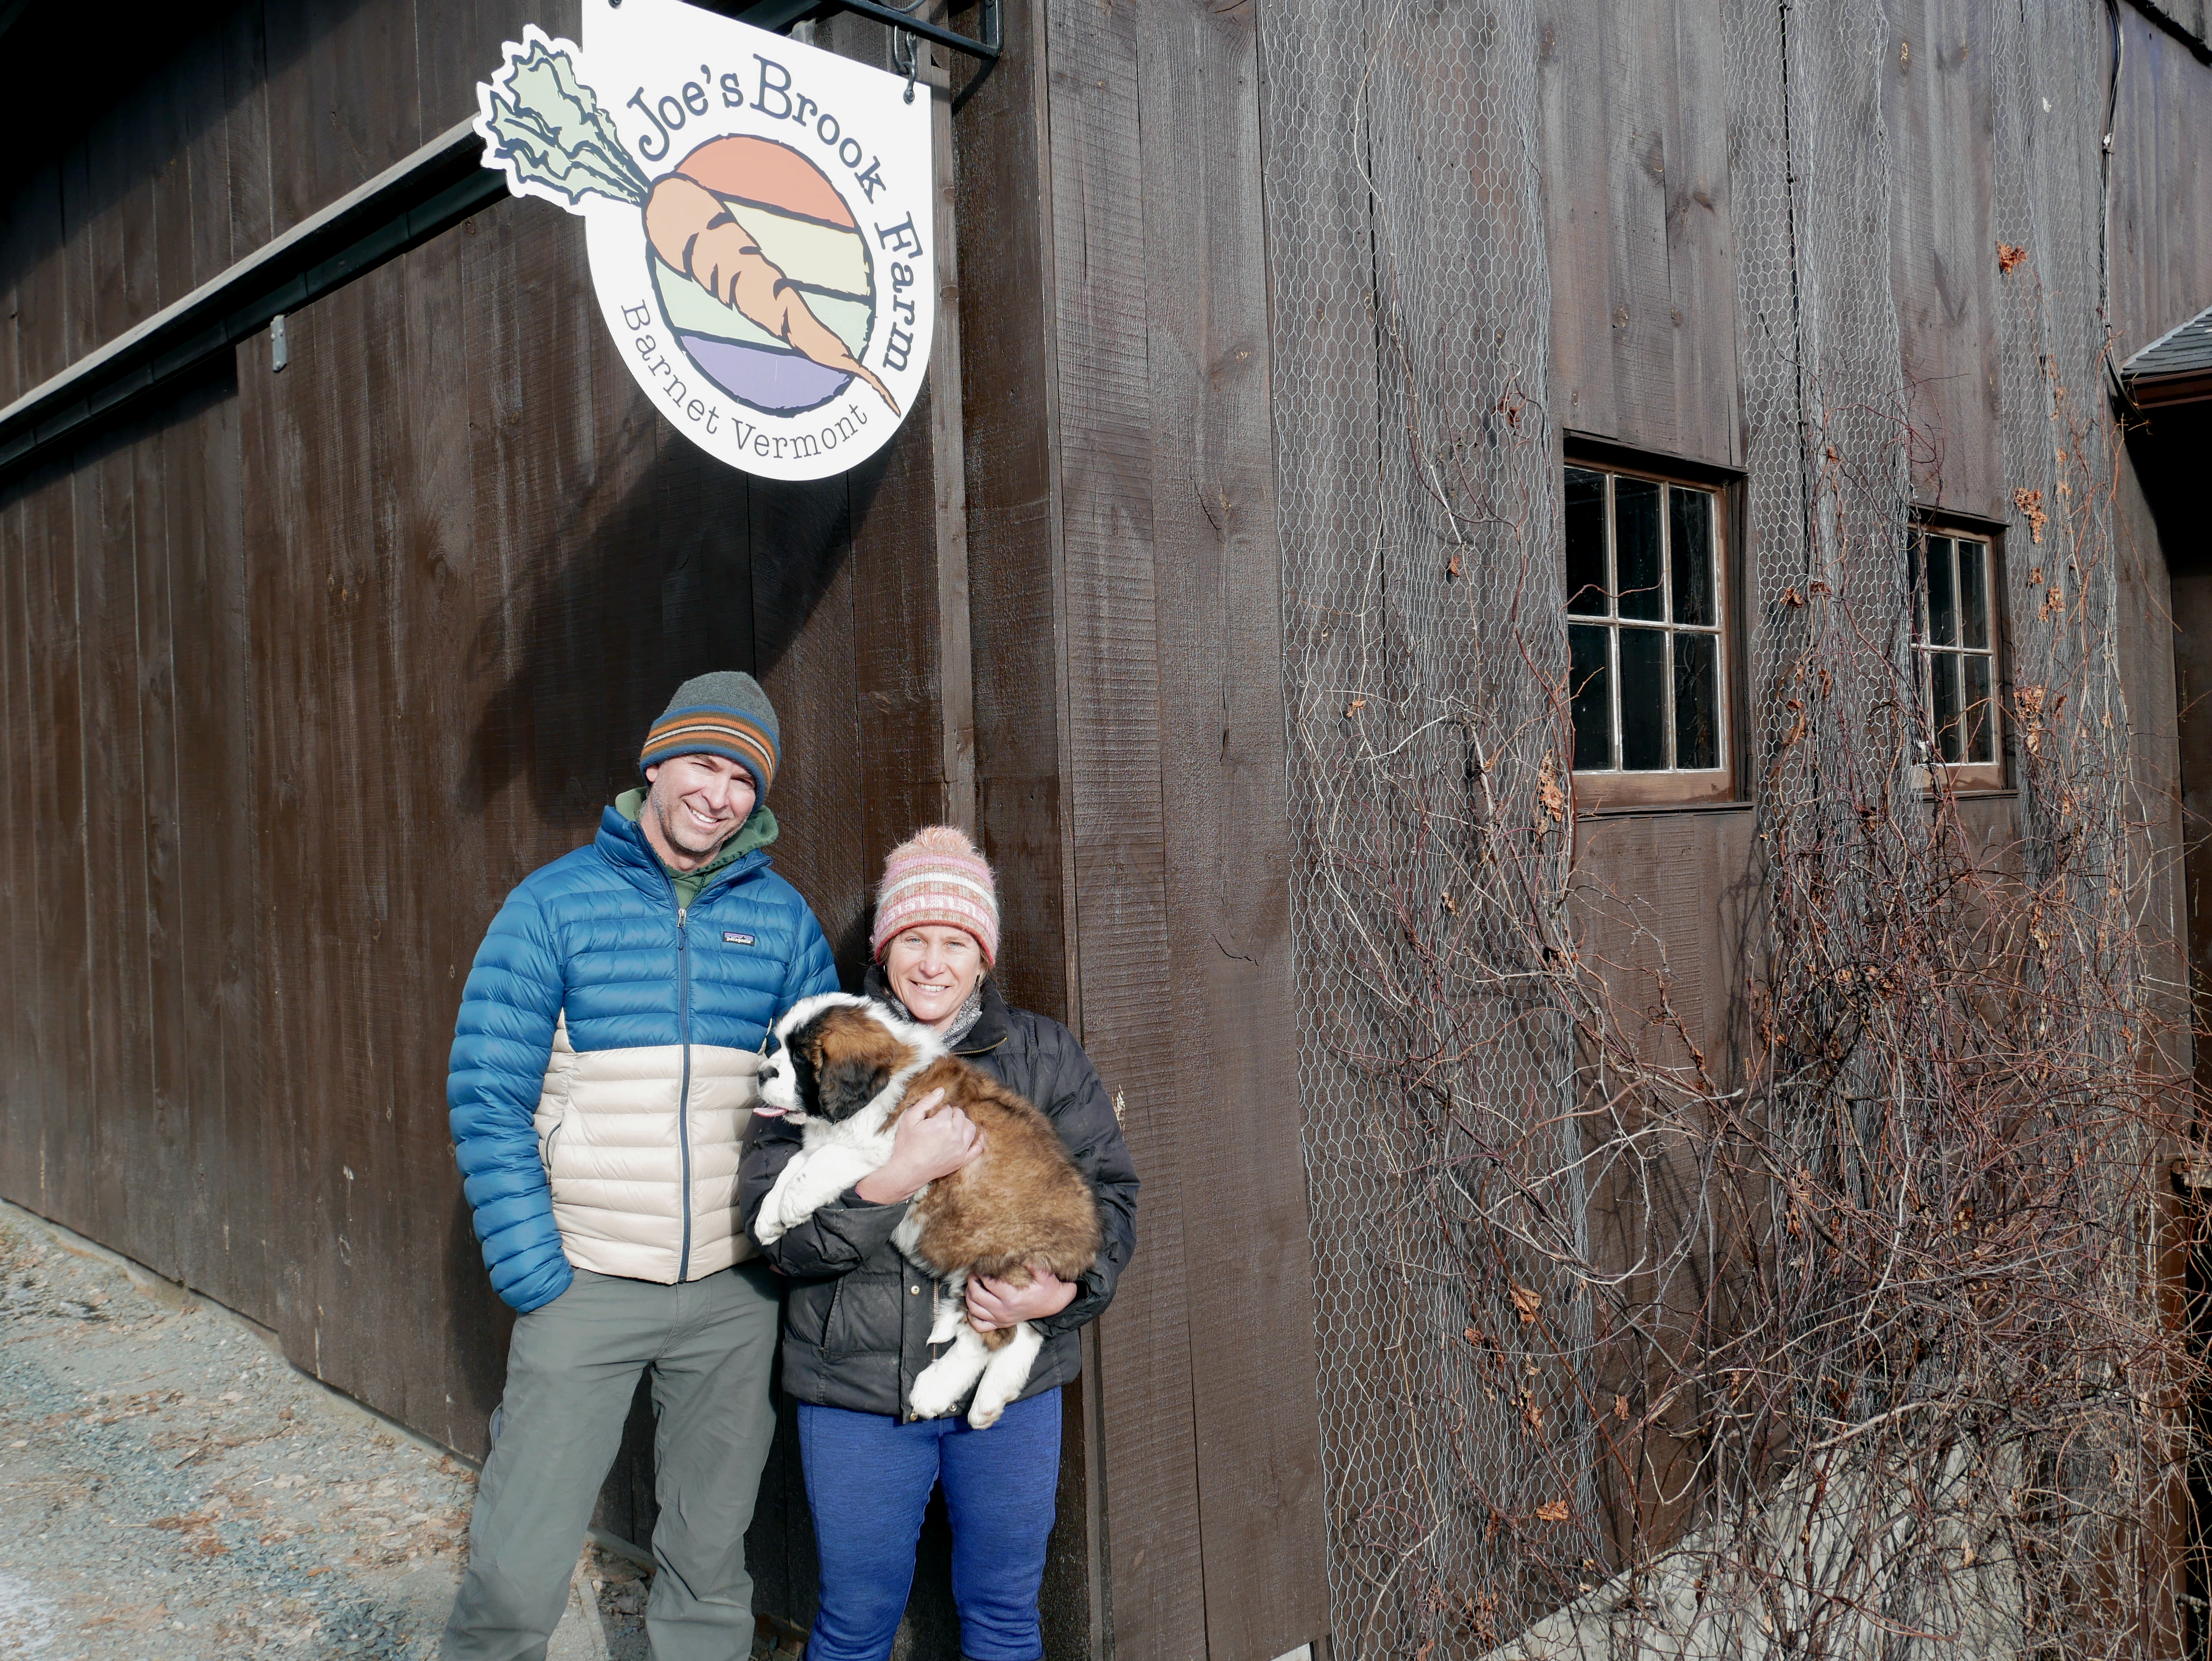 Eric and Mary Skovsted stand with their dog in front of their farm sign